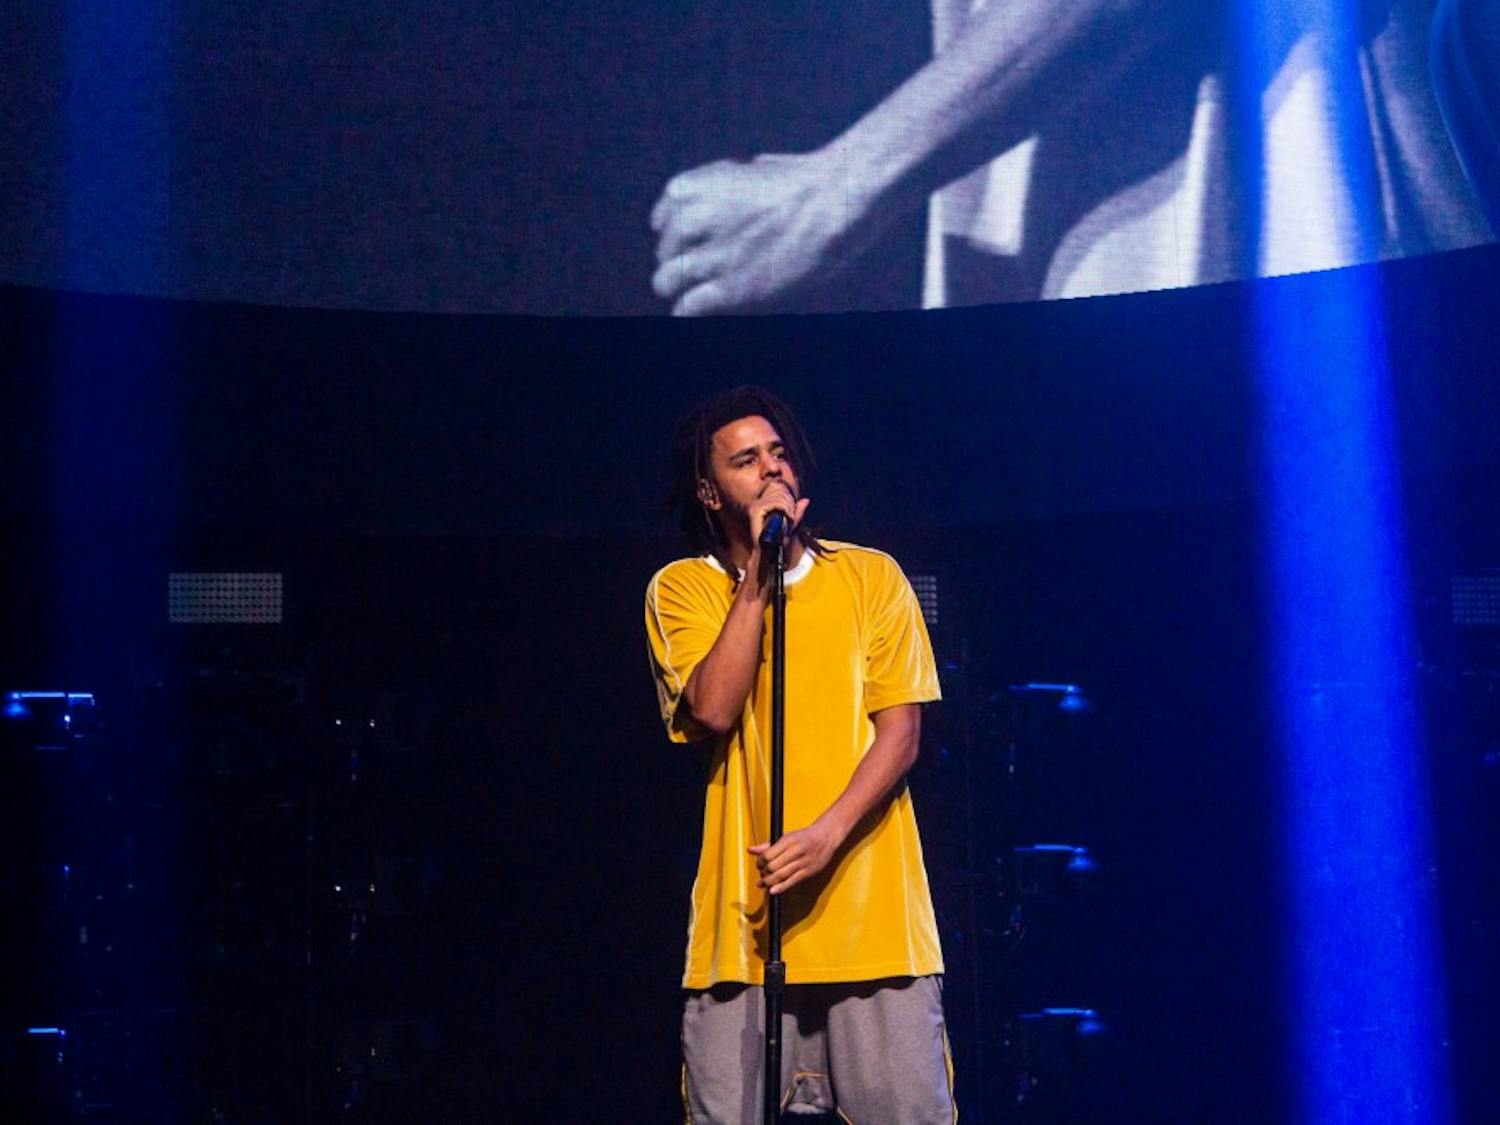 J. Cole brought his “KOD” Tour to the KeyBank Center on Tuesday night, mixing old cuts with the majority of tracks from his latest album. Cole spoke often to the audience, giving context to songs and sharing personal anecdotes.